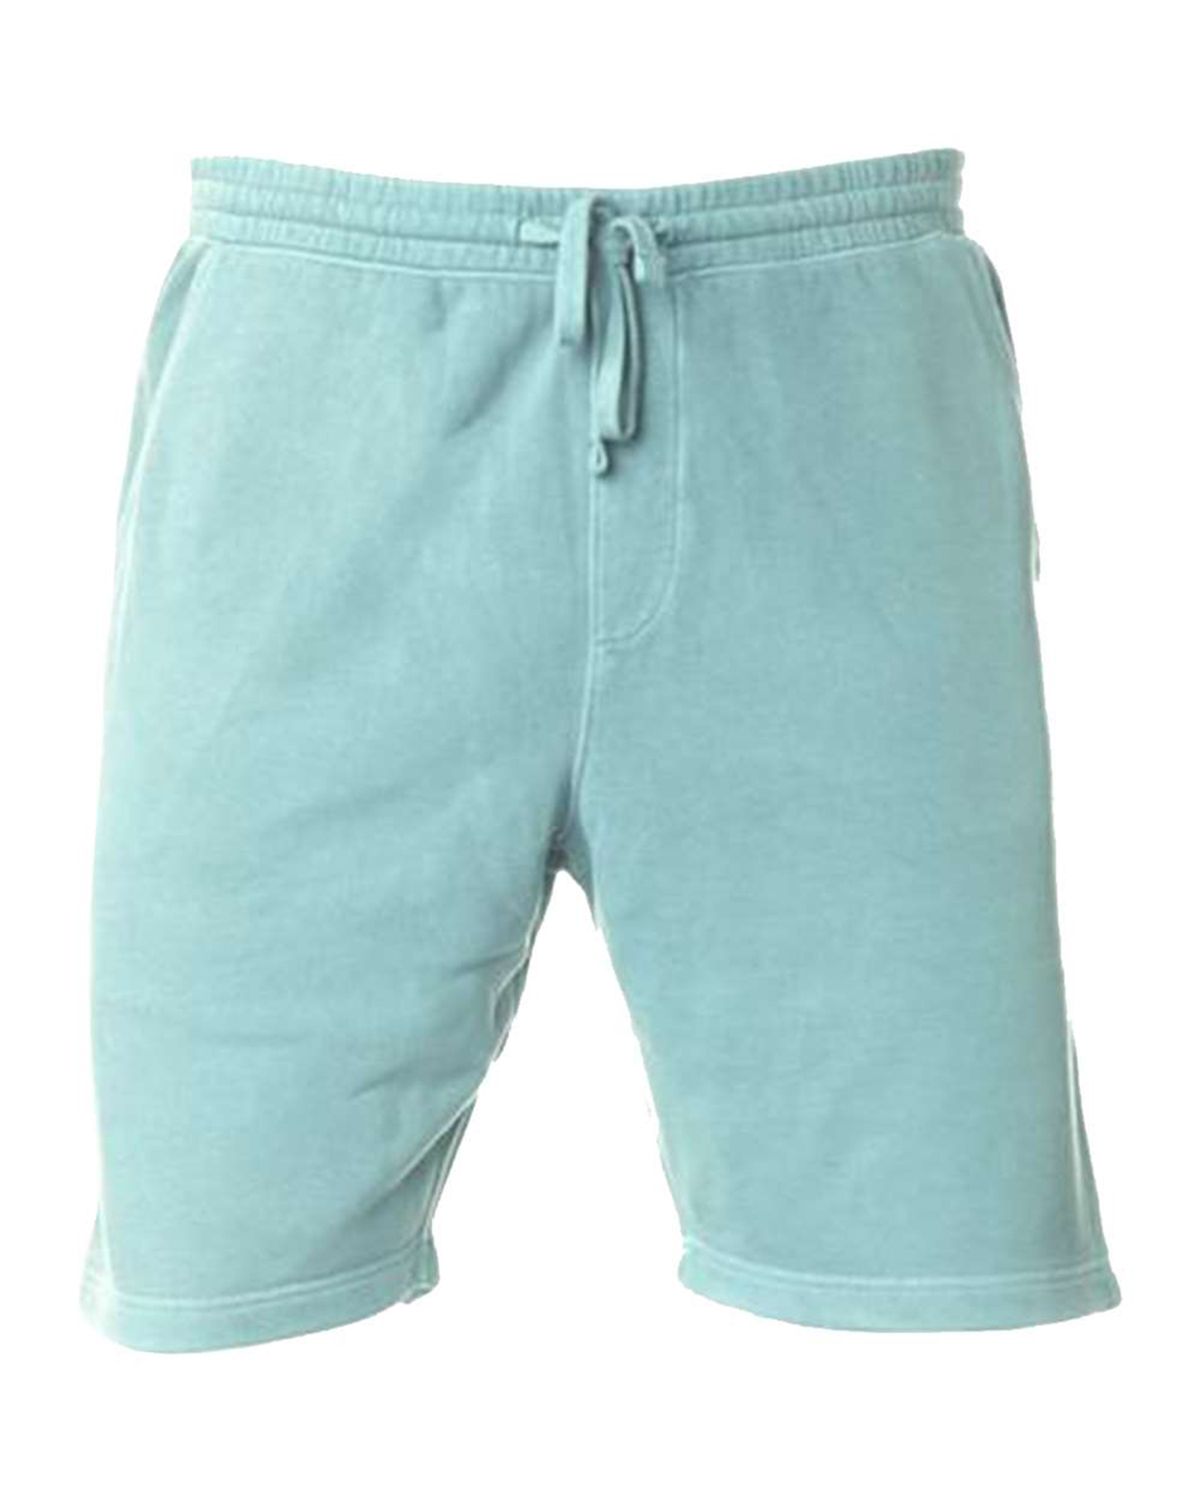 Independent Trading Co. PRM50STPD Men's Pigment-Dyed Fleece Shorts